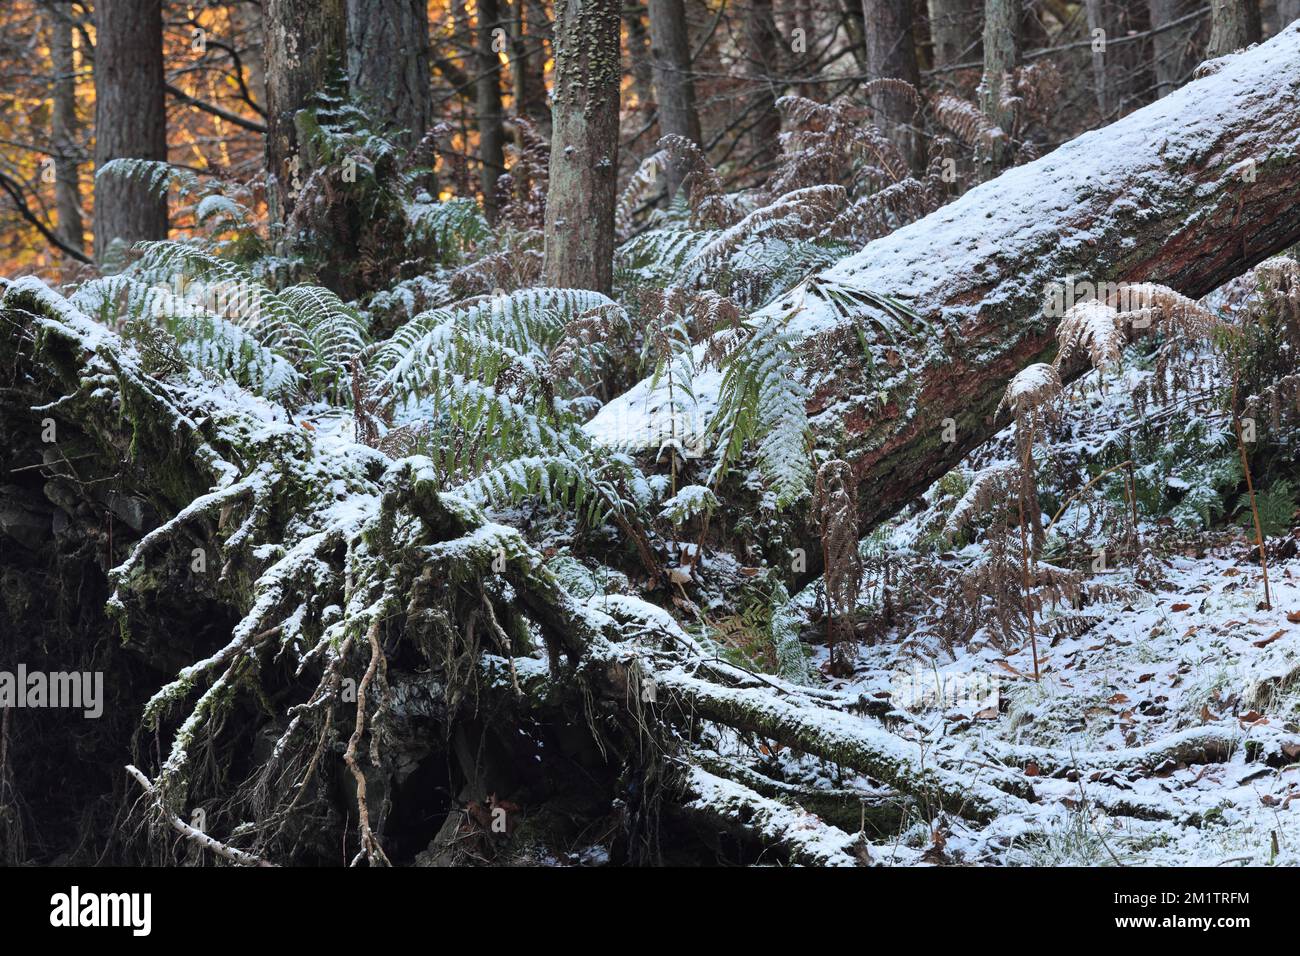 Fallen Tree in a Winter Woodland Scene, North Pennines, Bowlees, Teesdale, County Durham, REGNO UNITO Foto Stock